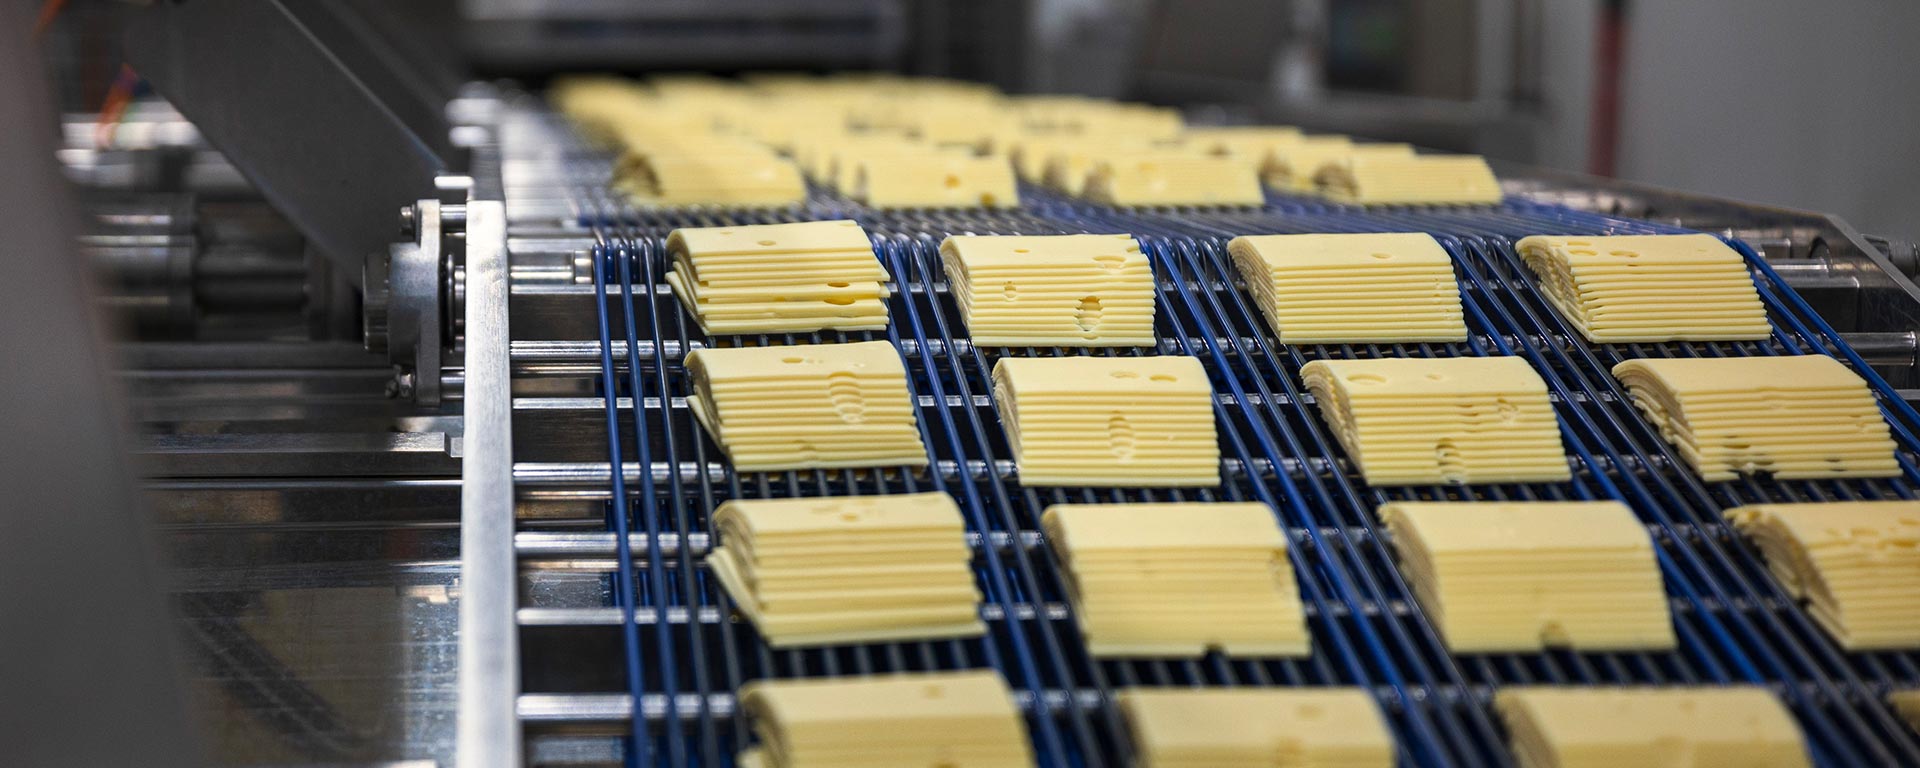 Stacks of Swiss Cheese on a conveyor belt